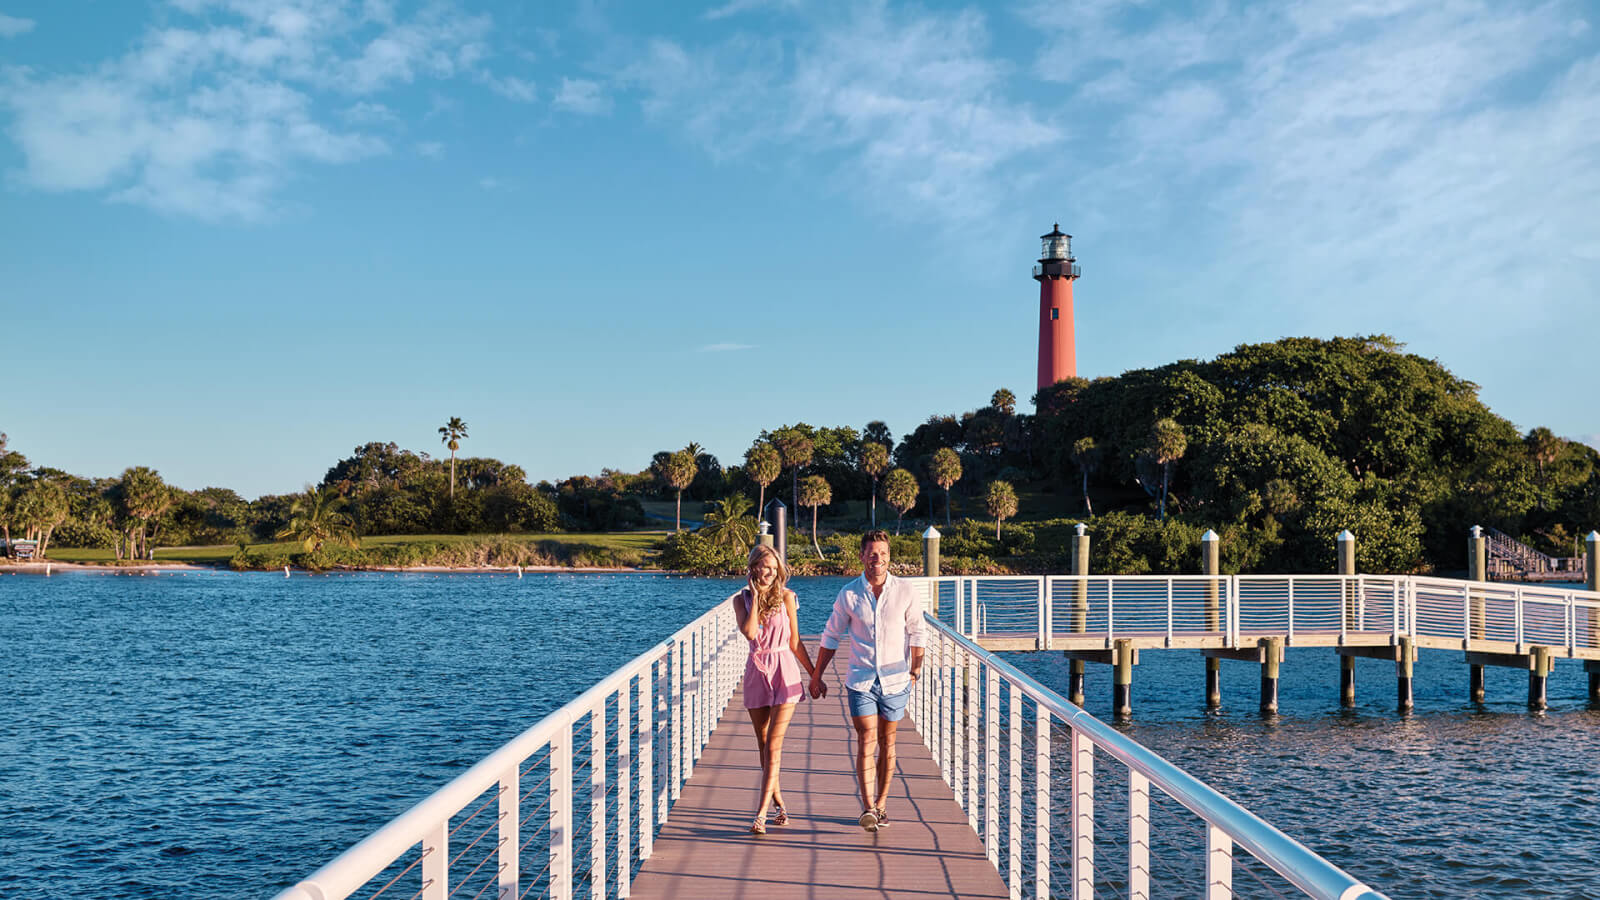 3-Day Wellness Itinerary in The Palm Beaches